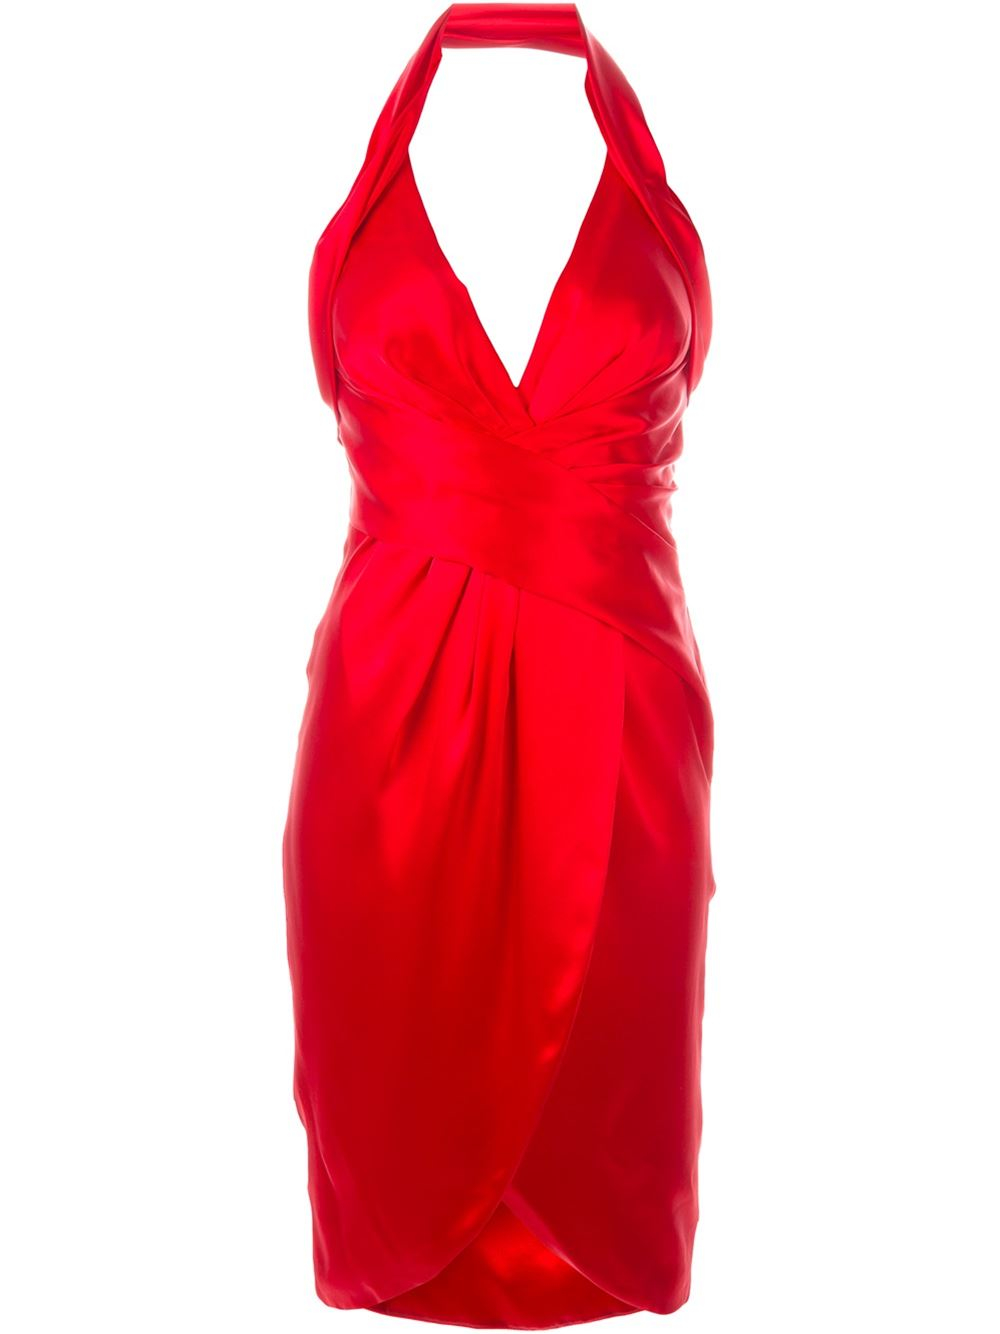 Moschino Halter Cocktail Dress in Red - Lyst